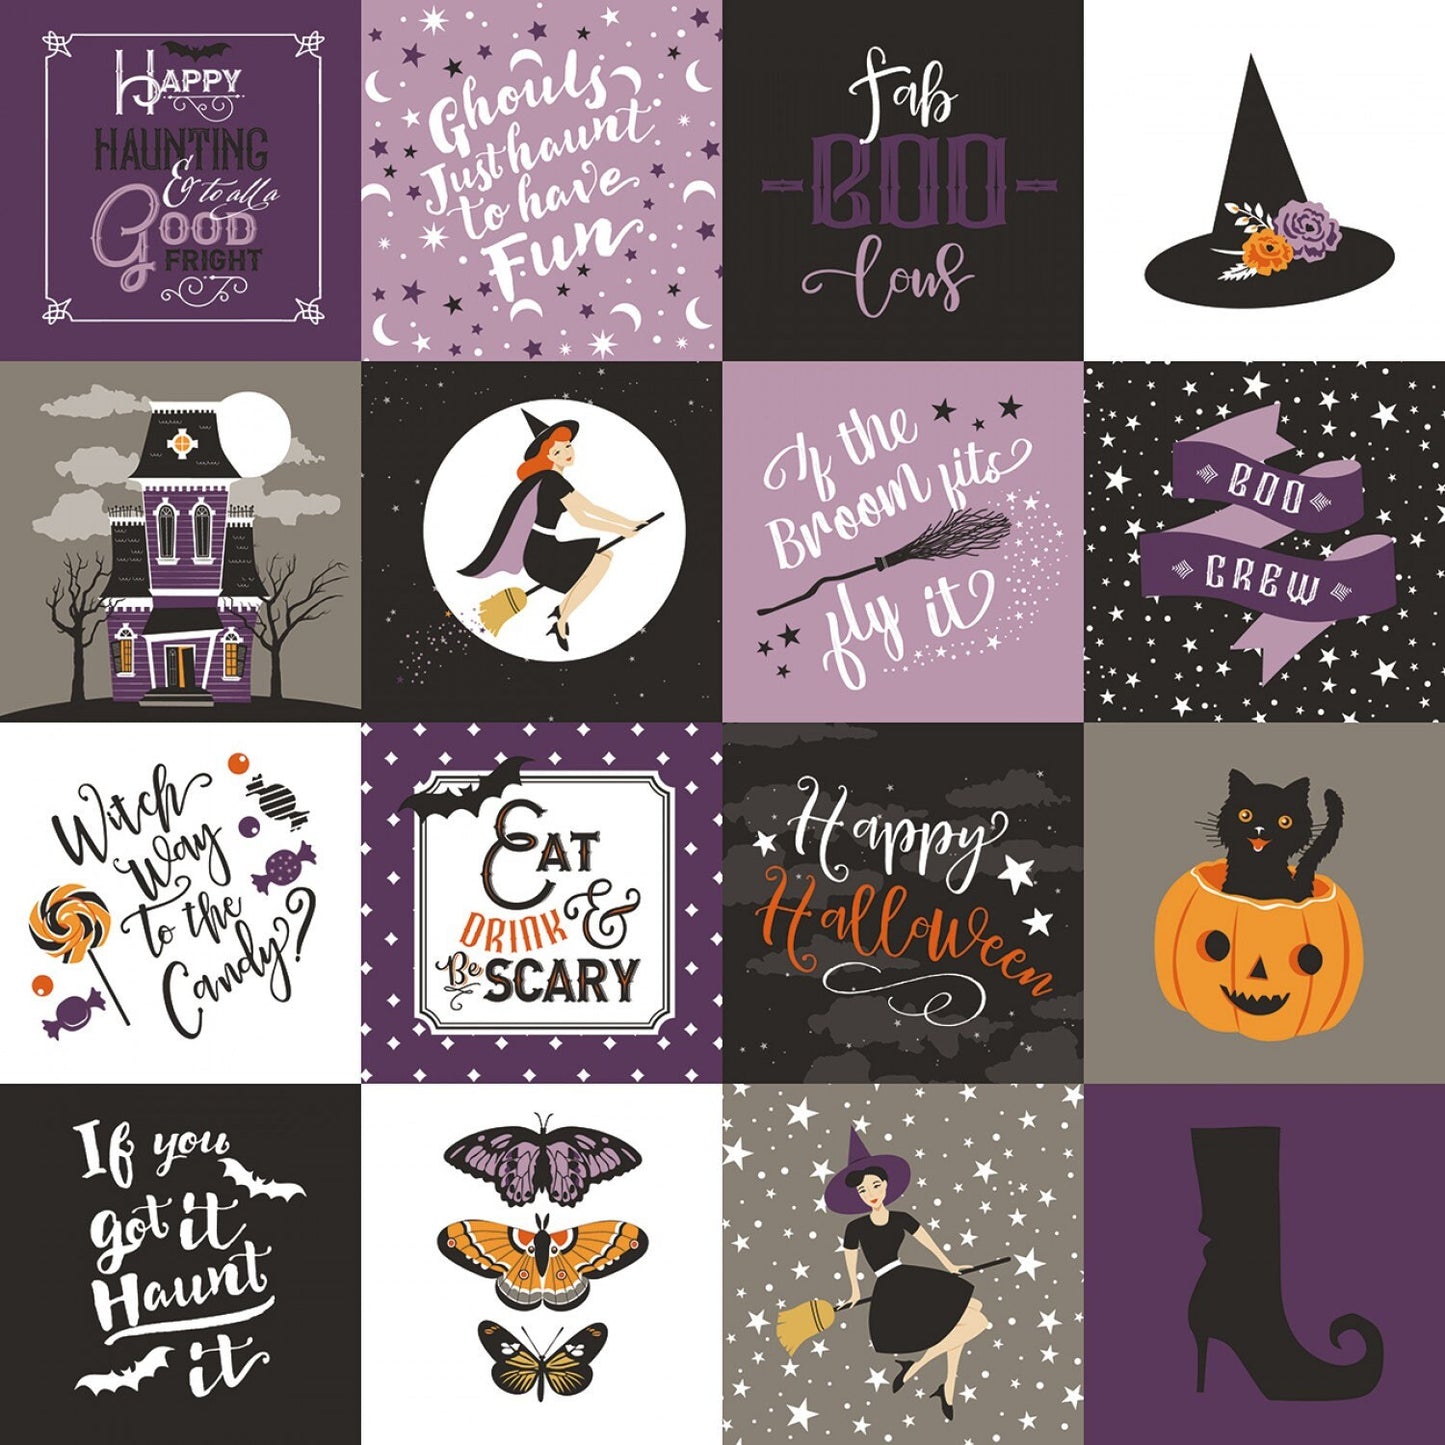 Fab Boo Lous Witches by Dani Mogstad Main Purple C8170R-PURPL (Blocks are 3" X 3") Cotton Woven Fabric